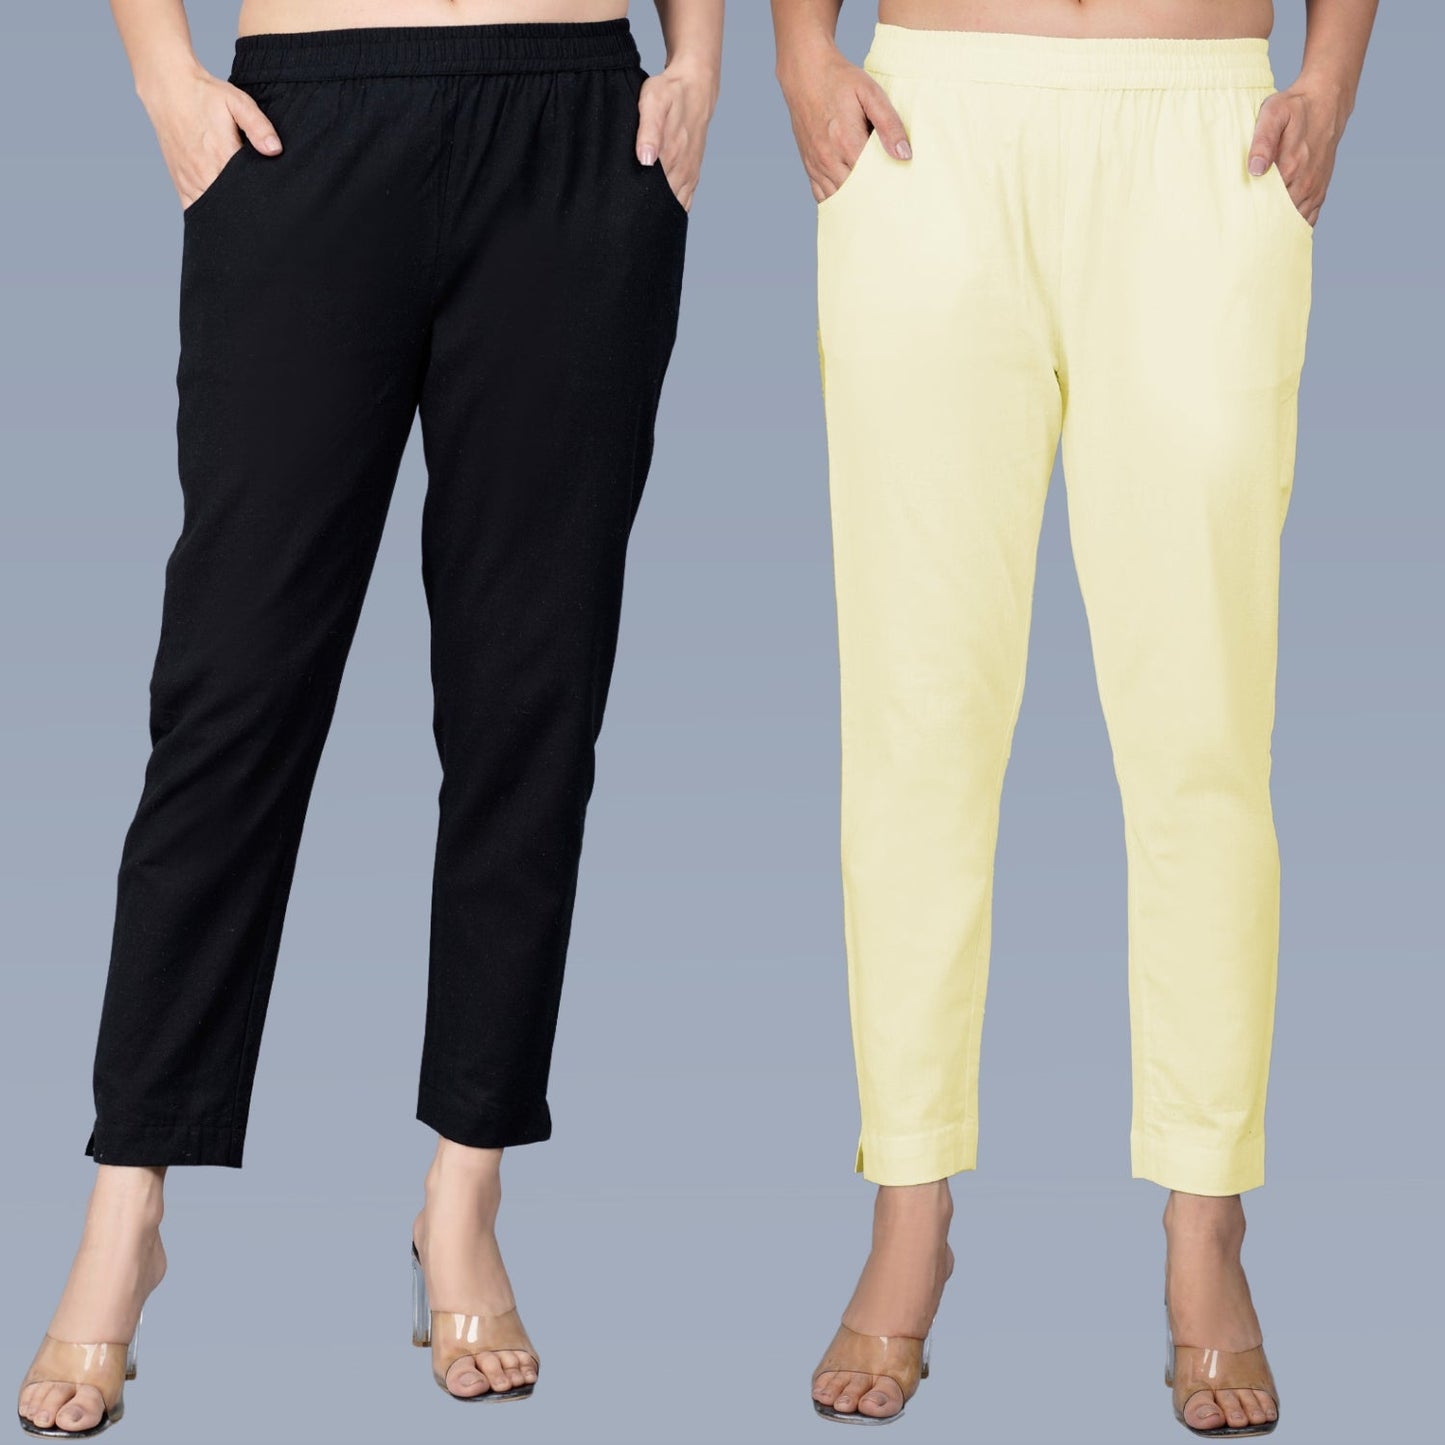 Pack Of 2 Womens Regular Fit Black And Cream Fully Elastic Waistband Cotton Trouser